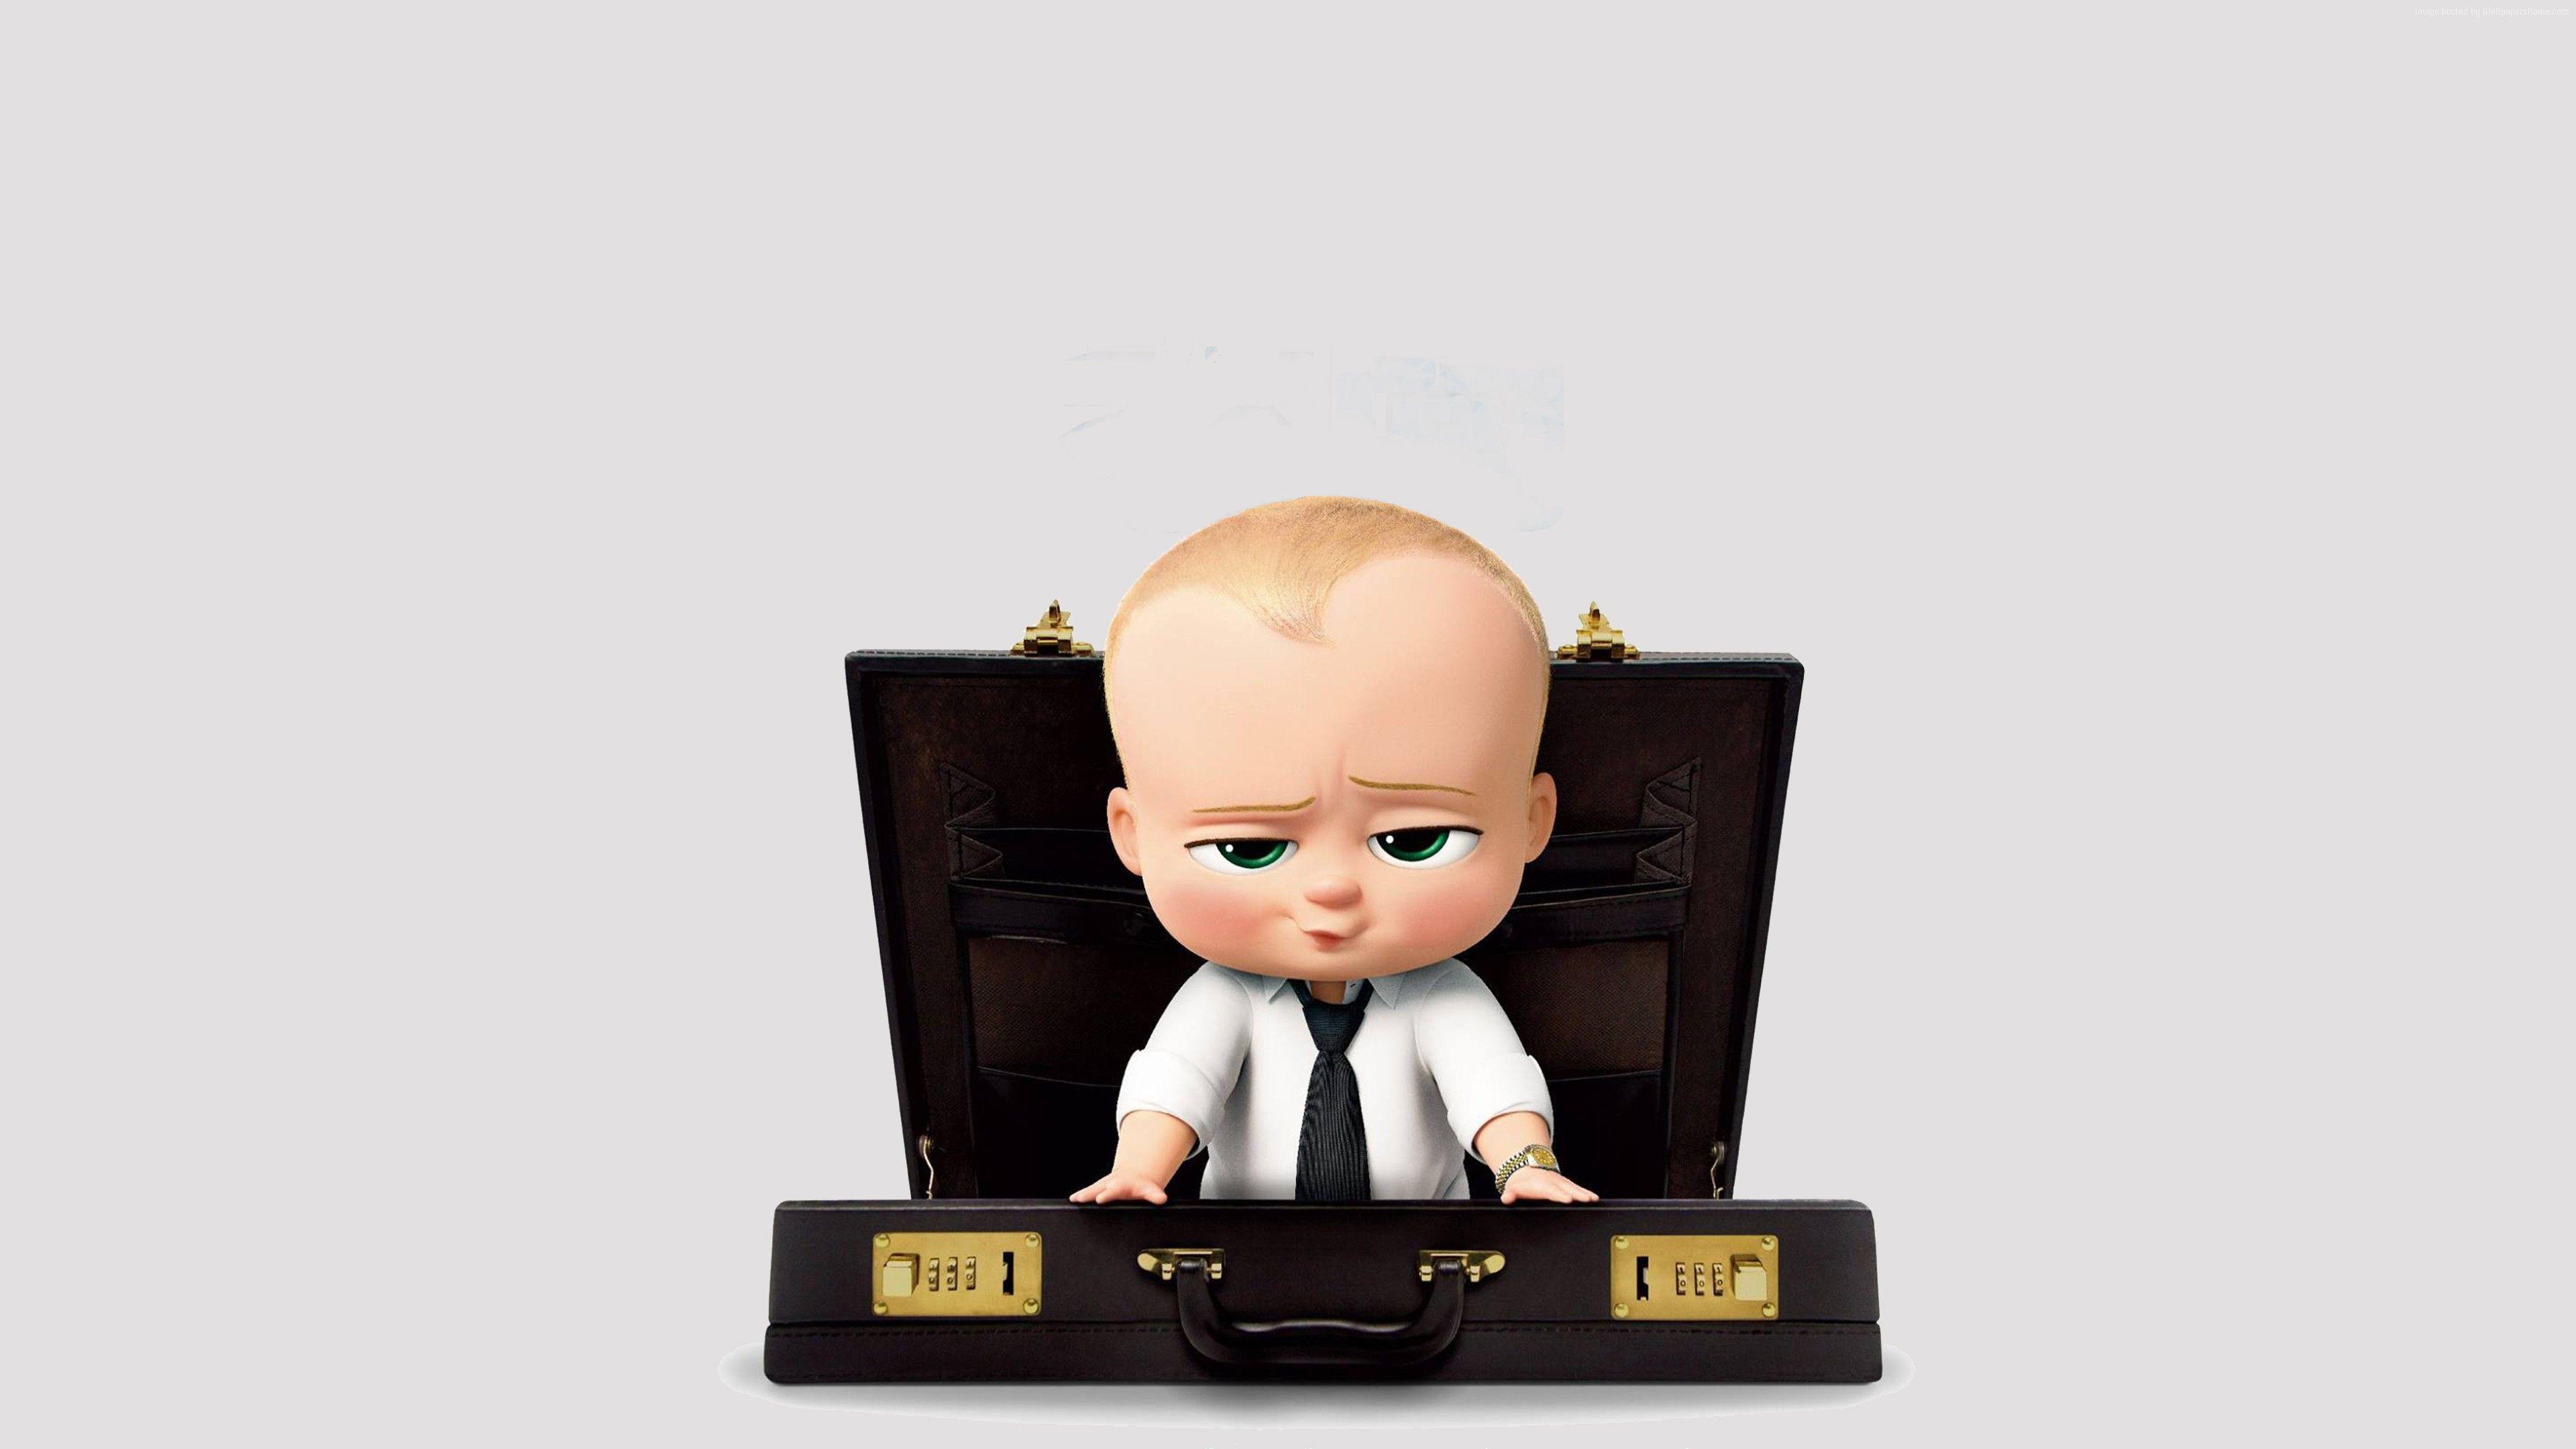 Wallpaper The Boss Baby, Baby, family, best animation movies